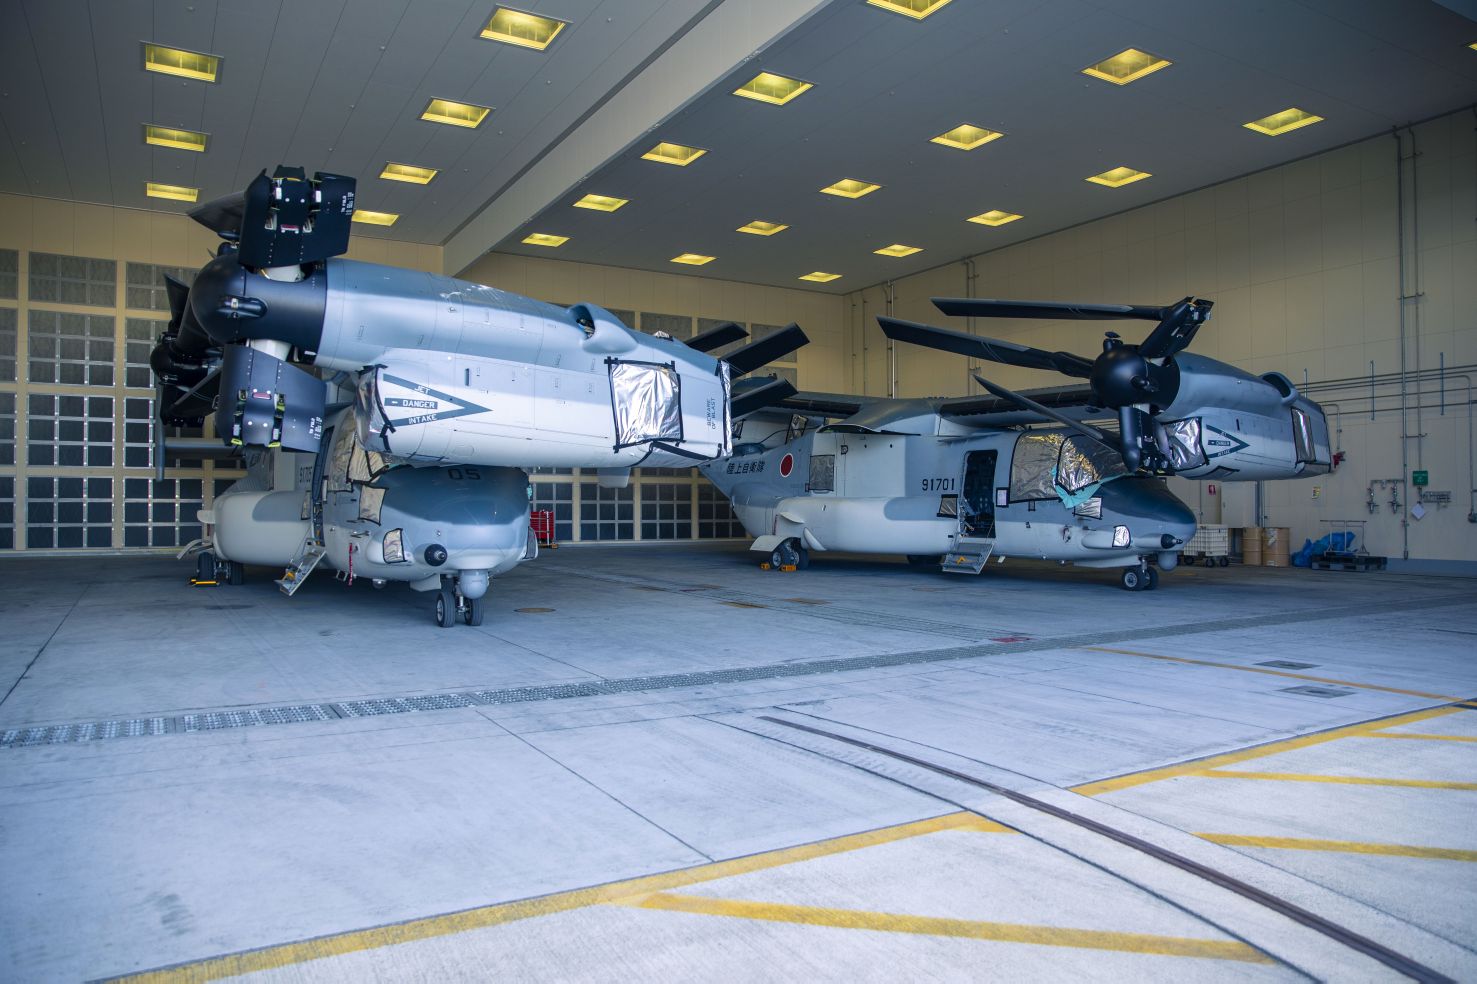 The first two MV-22B Osprey tiltrotor aircraft on order for the JGSDF arrived in Japan on 8 May. Tokyo has ordered a total of 17 of these platforms. 